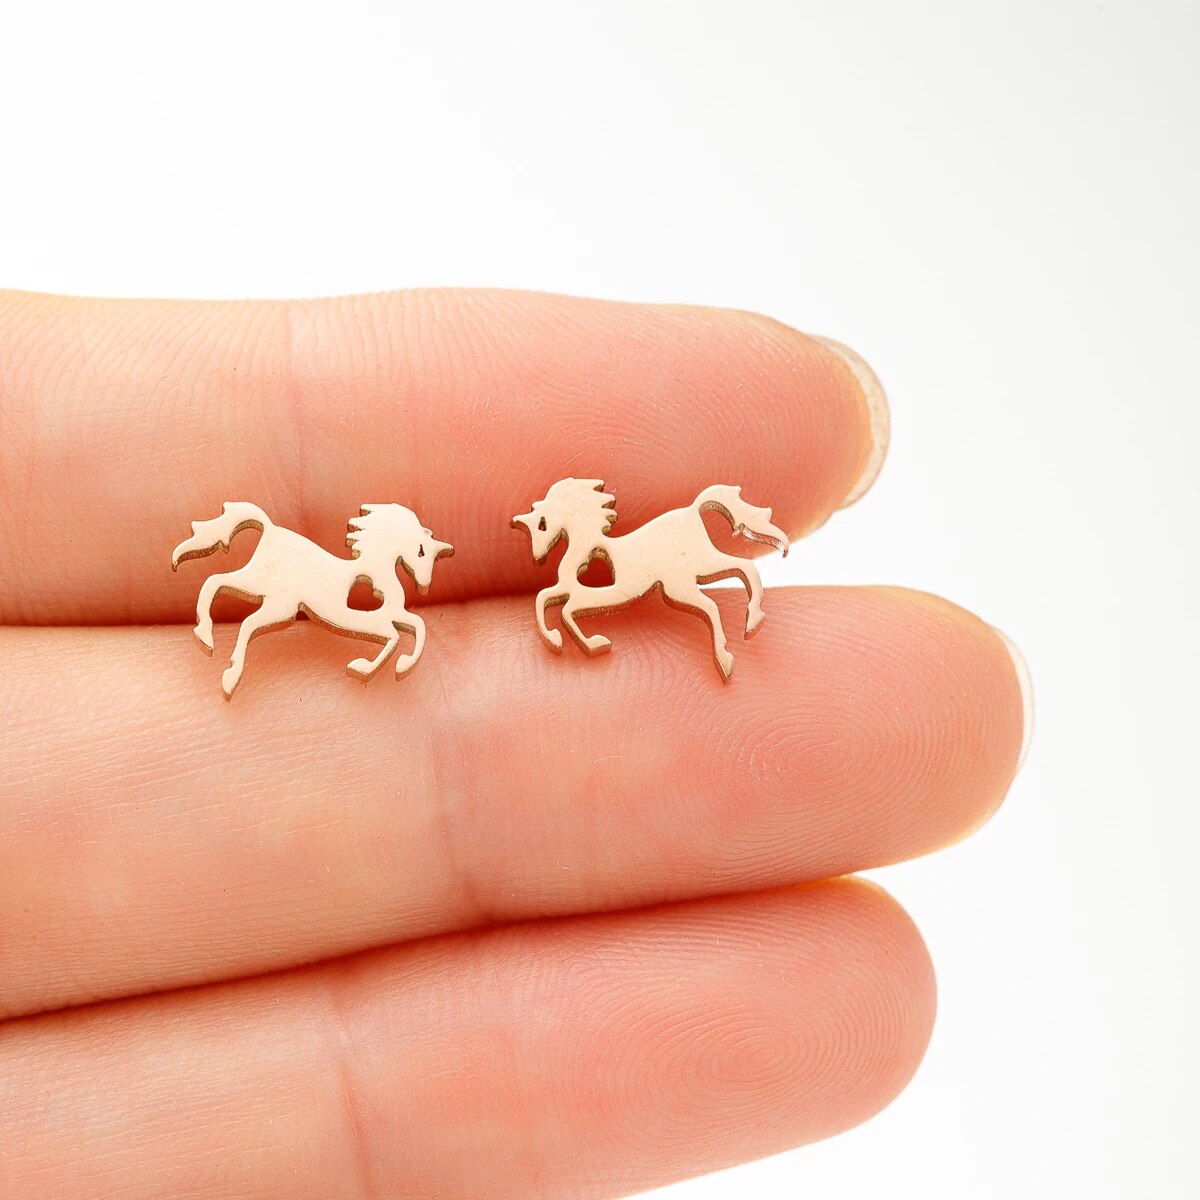 1 Pair Mini Horse Stud Earrings For Girls Women Stainless Steel Sweet Animal Ear Ring Cute Stylish Student Birthday Party Jewelr